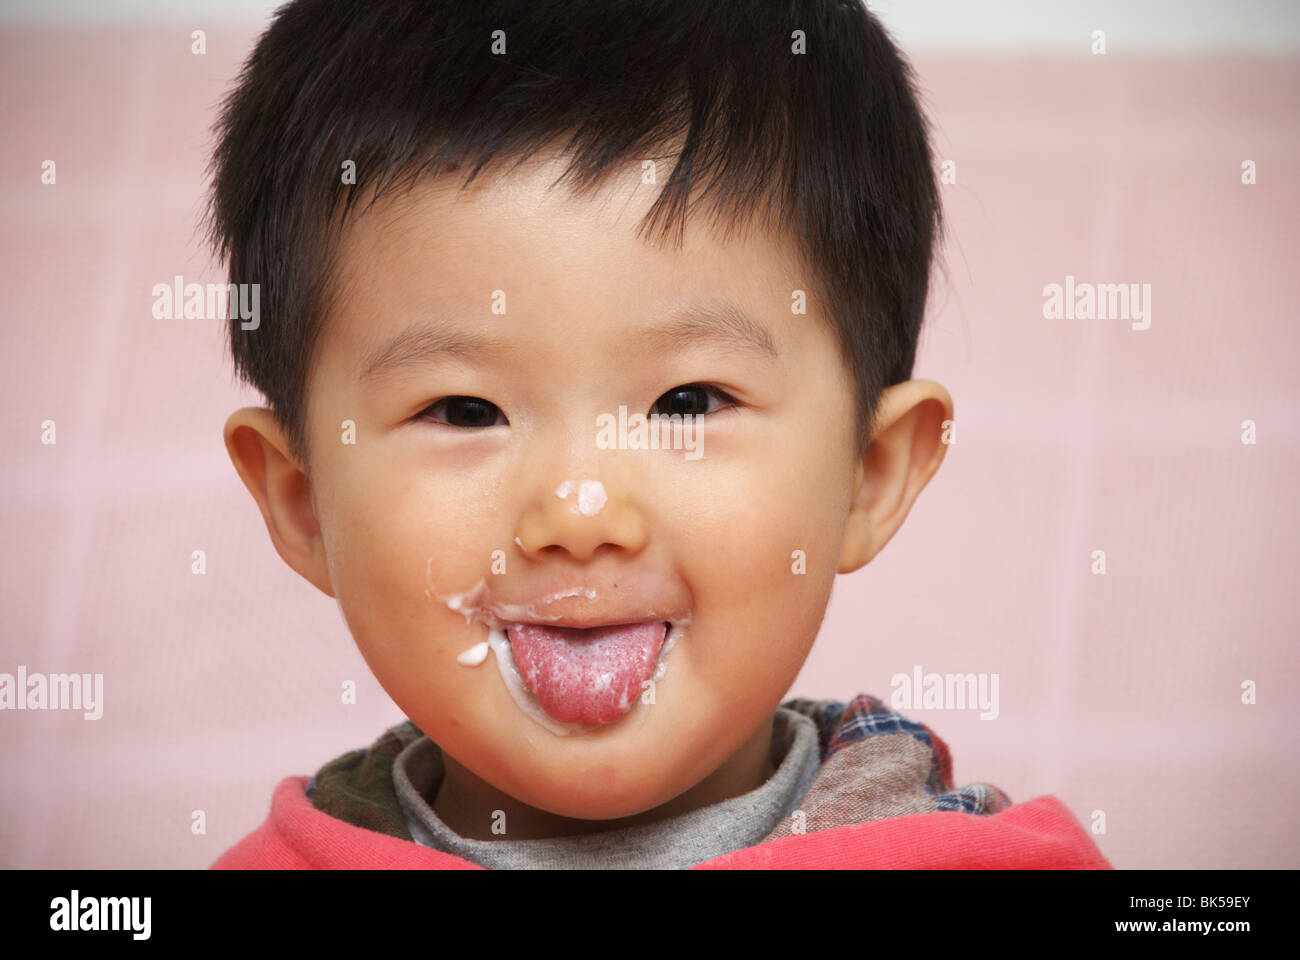 Asian baby with yogurt on face Stock Photo